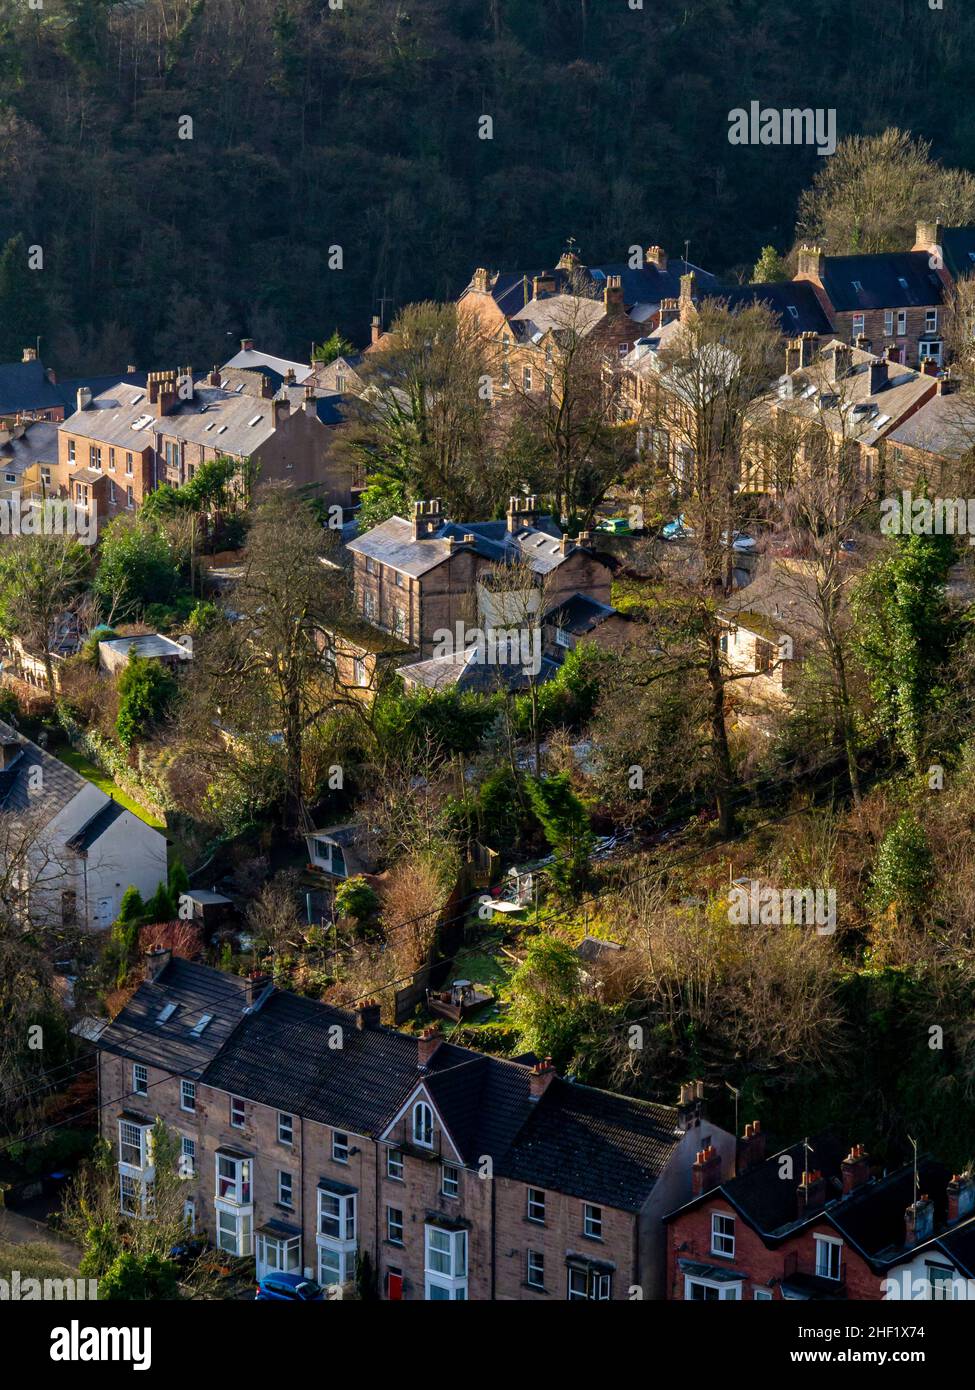 View looking down on rooftops and chimneys in Matlock Bath a village in the Derbyshire Dales area of the Peak District England UK Stock Photo